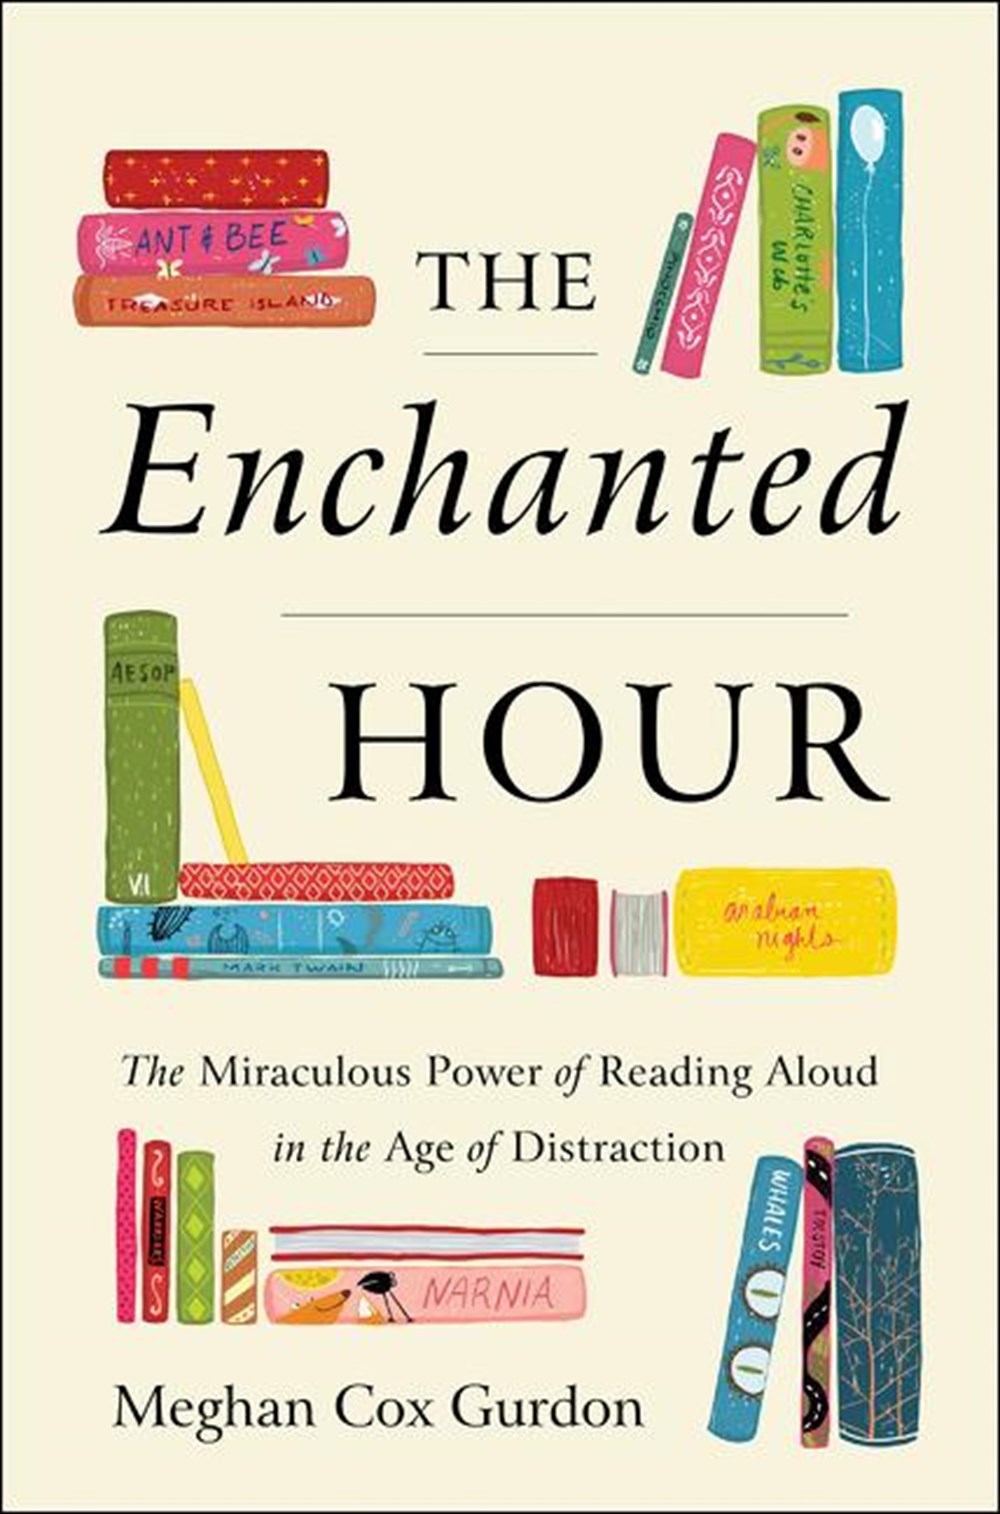 Enchanted Hour: The Miraculous Power of Reading Aloud in the Age of Distraction